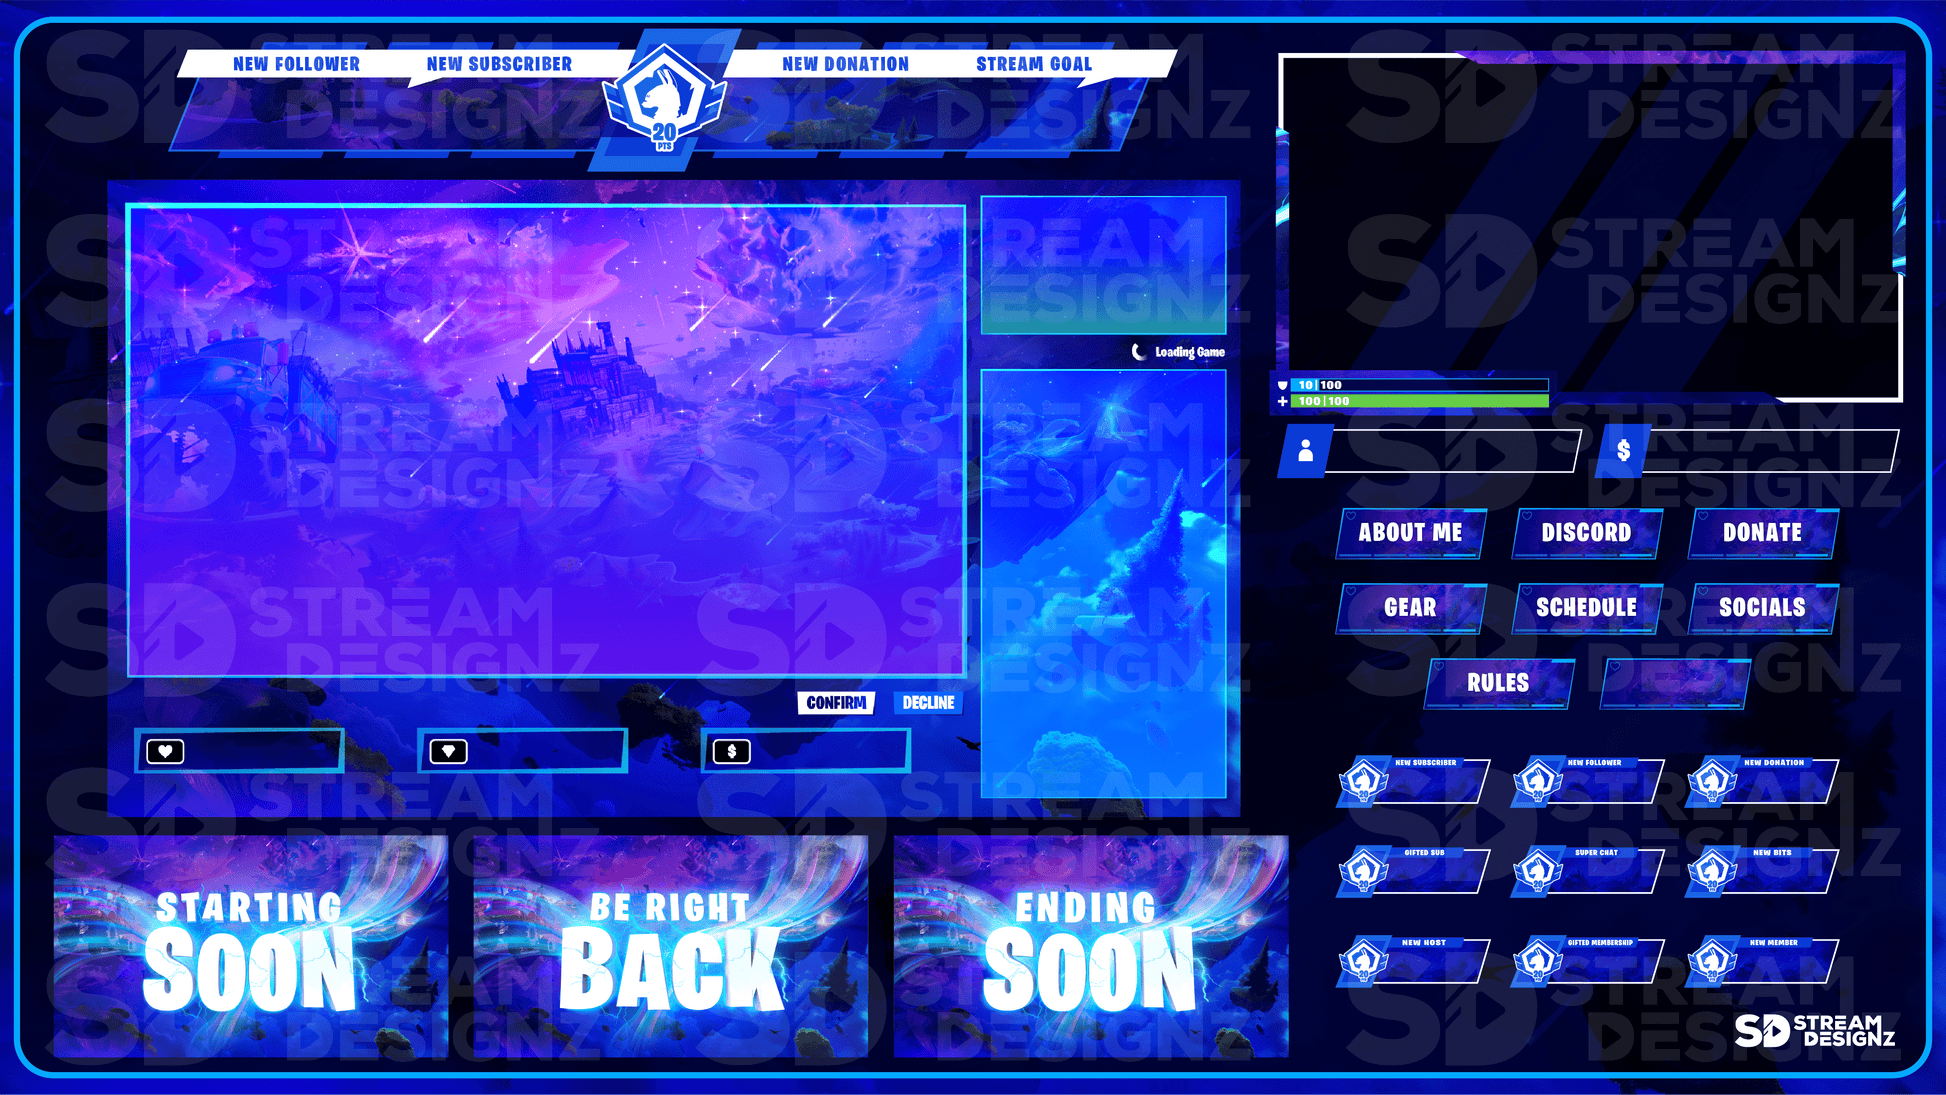 static stream overlay package feature image royale stream designz